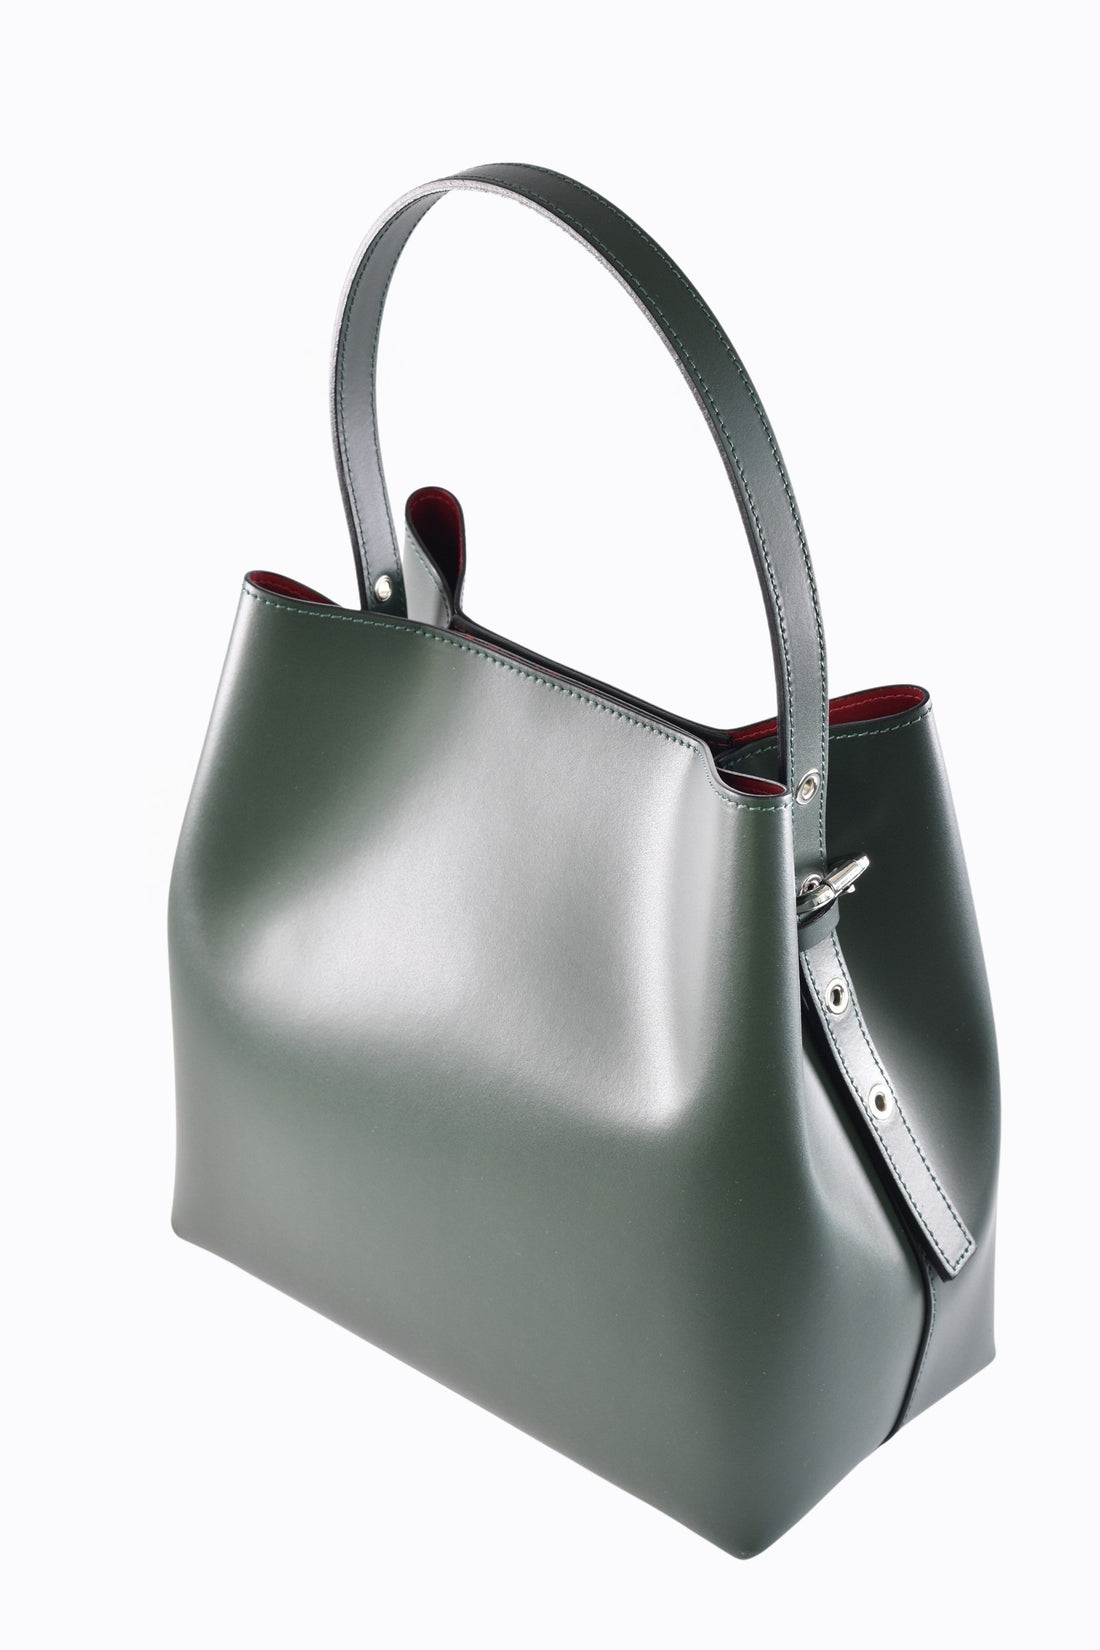 Melany bag in Forest Green brushed leather